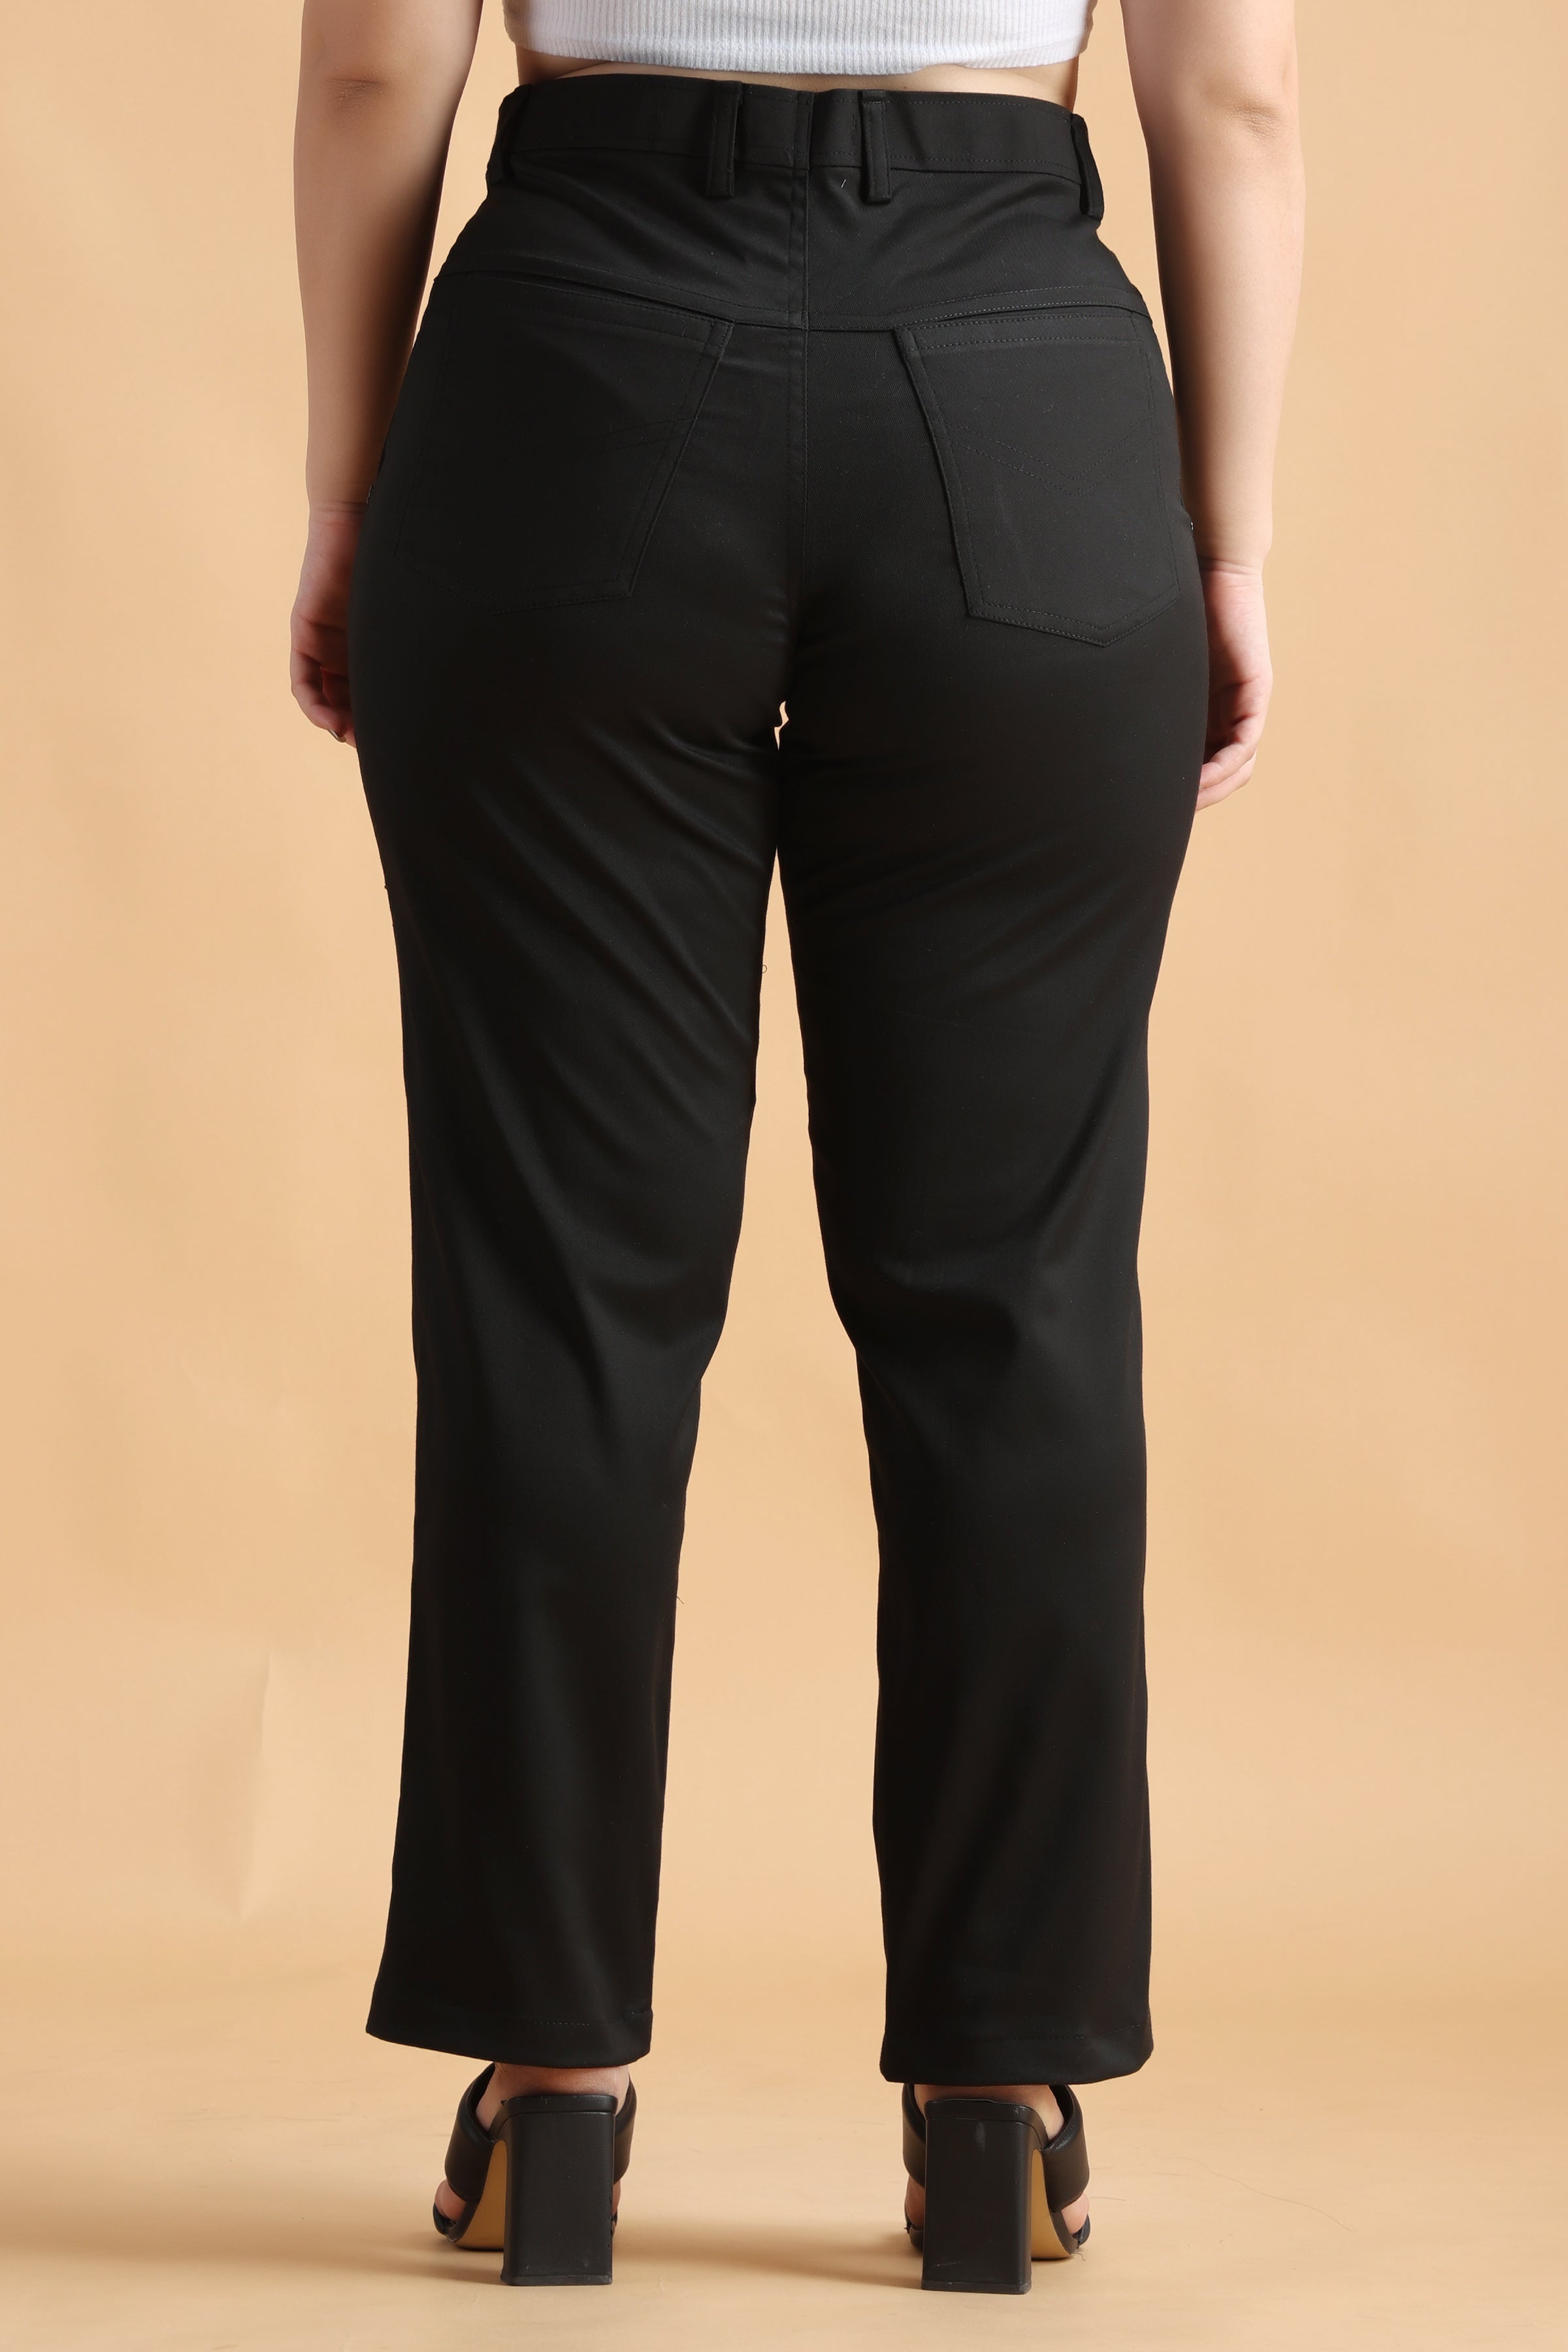 Black Trousers  Buy Black Trousers Online in India